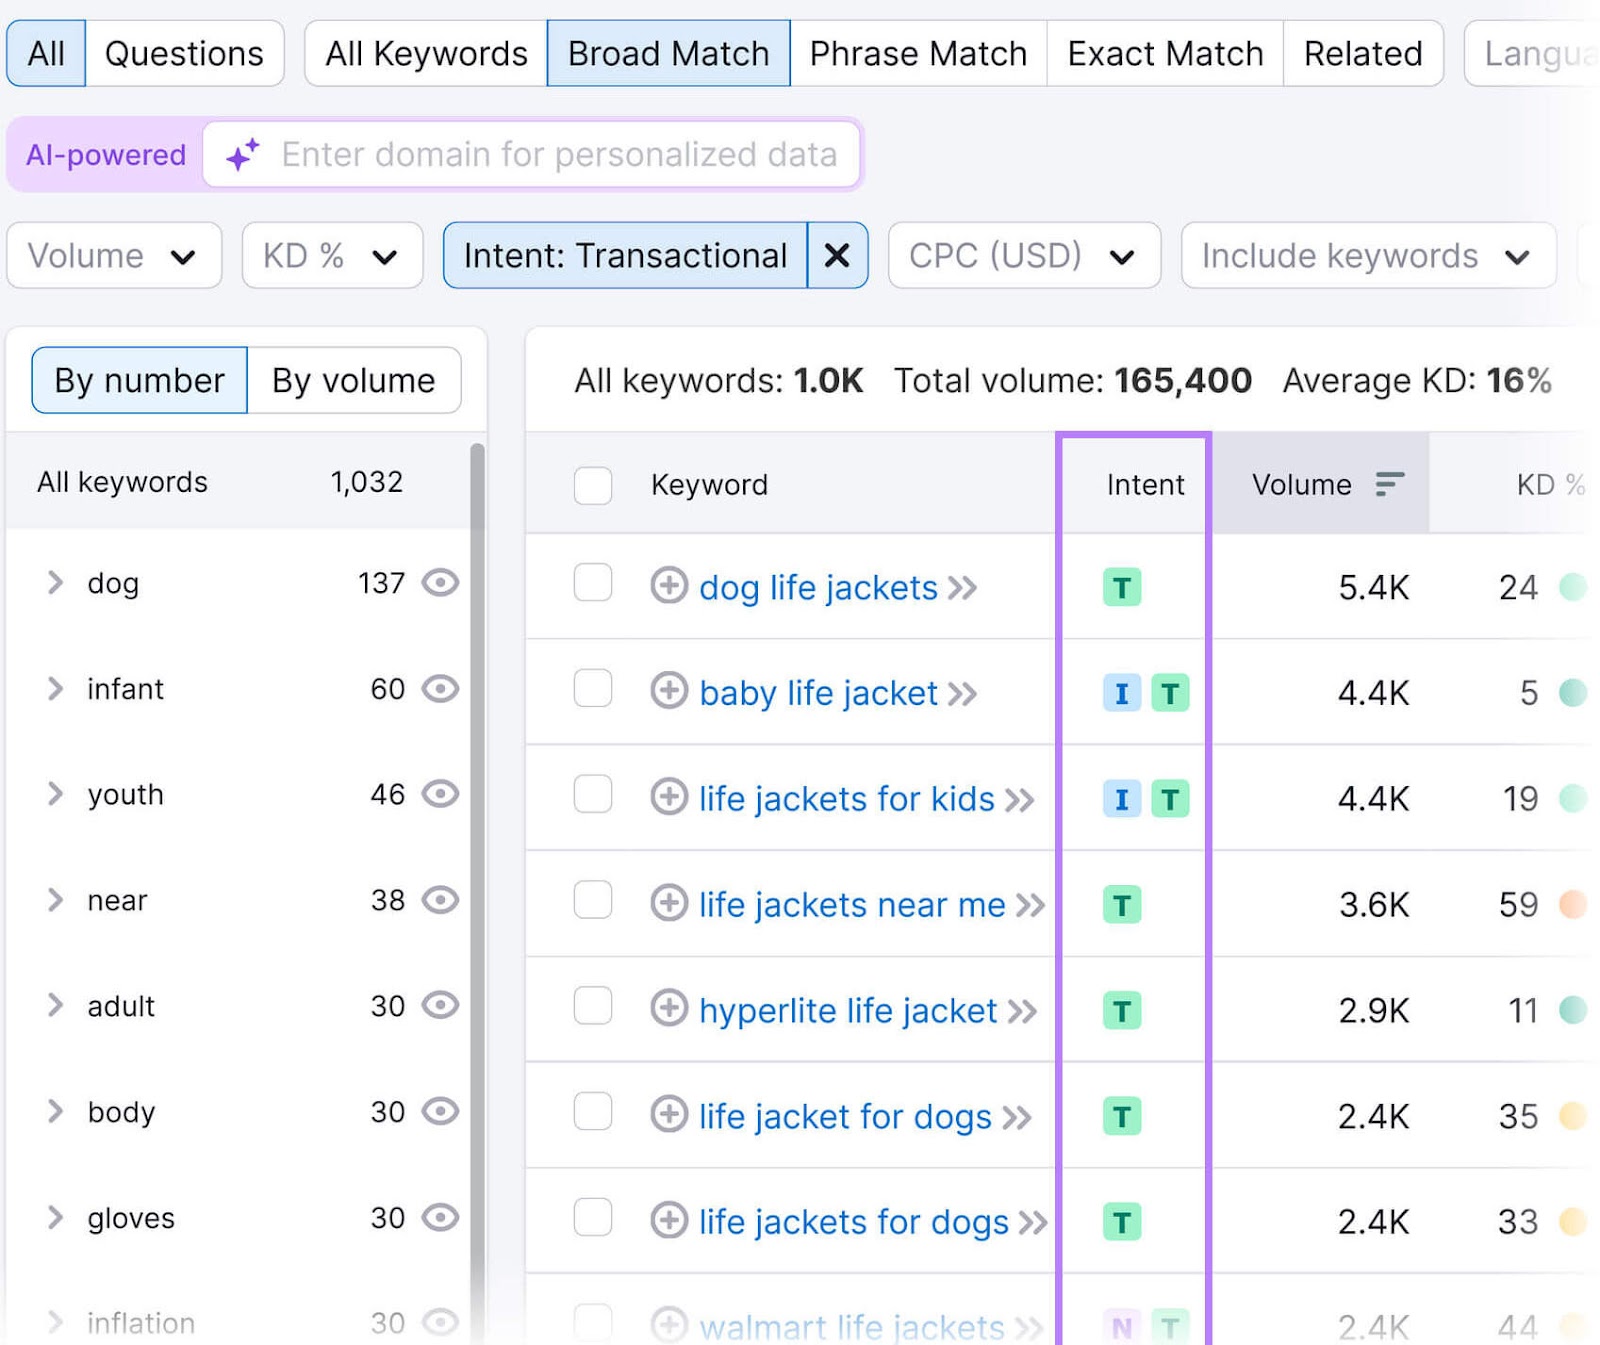 Keyword Magic Tool interface displaying the "Intent: Transactional" filter and the "Intent" column in a purple box.